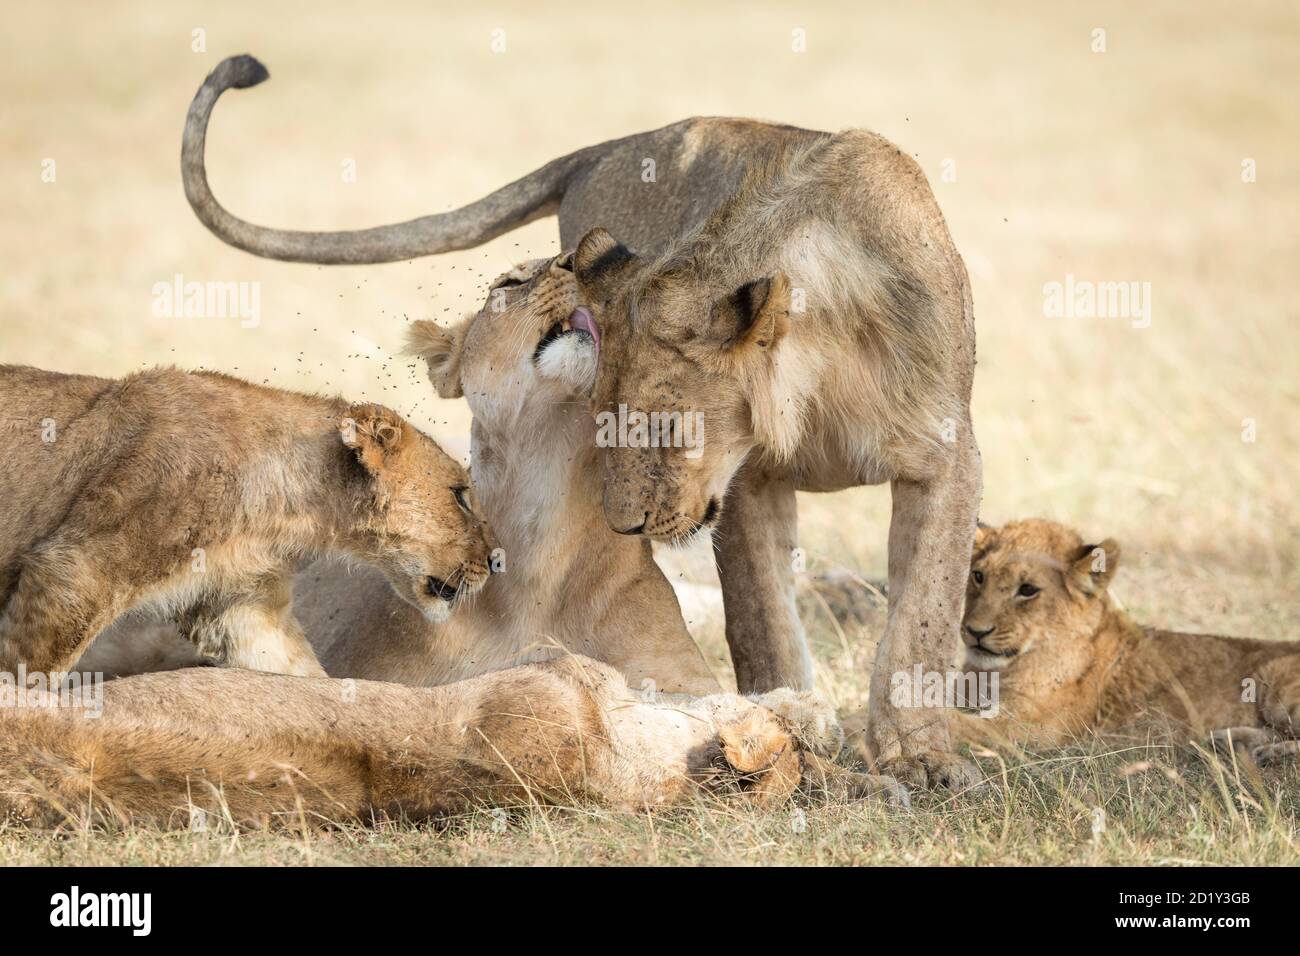 Pride of lions greeting each other and showing affection while lying down in dry grass in Masai Mara in Kenya Stock Photo